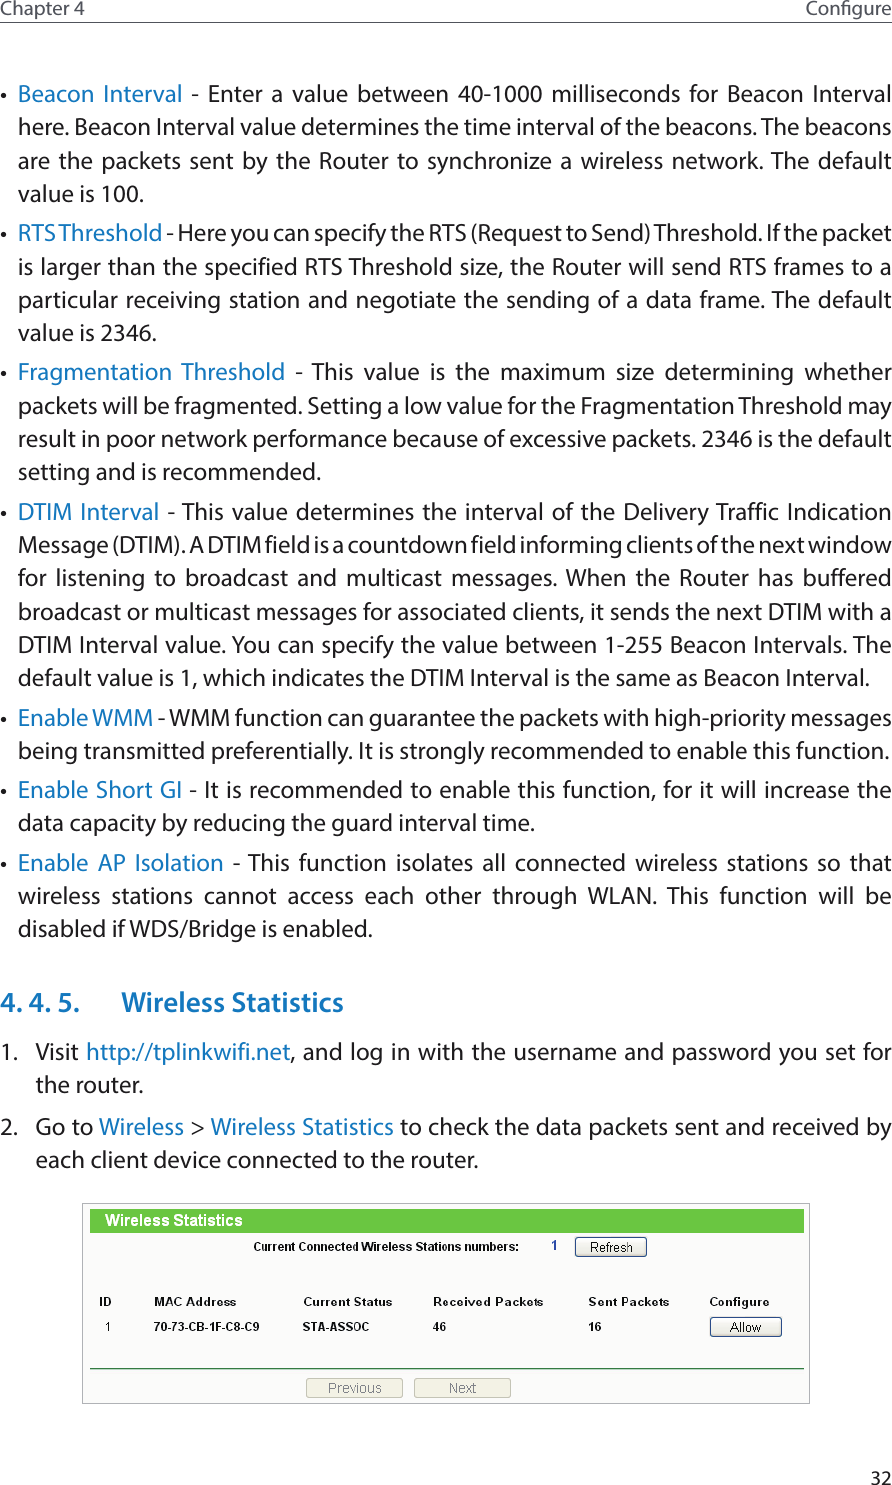 32Chapter 4 Congure•  Beacon Interval - Enter a value between 40-1000 milliseconds for Beacon Interval here. Beacon Interval value determines the time interval of the beacons. The beacons are the packets sent by the Router to synchronize a wireless network. The default value is 100. •  RTS Threshold - Here you can specify the RTS (Request to Send) Threshold. If the packet is larger than the specified RTS Threshold size, the Router will send RTS frames to a particular receiving station and negotiate the sending of a data frame. The default value is 2346. •  Fragmentation Threshold - This value is the maximum size determining whether packets will be fragmented. Setting a low value for the Fragmentation Threshold may result in poor network performance because of excessive packets. 2346 is the default setting and is recommended. •  DTIM Interval - This value determines the interval of the Delivery Traffic Indication Message (DTIM). A DTIM field is a countdown field informing clients of the next window for listening to broadcast and multicast messages. When the Router has buffered broadcast or multicast messages for associated clients, it sends the next DTIM with a DTIM Interval value. You can specify the value between 1-255 Beacon Intervals. The default value is 1, which indicates the DTIM Interval is the same as Beacon Interval. •  Enable WMM - WMM function can guarantee the packets with high-priority messages being transmitted preferentially. It is strongly recommended to enable this function. •  Enable Short GI - It is recommended to enable this function, for it will increase the data capacity by reducing the guard interval time. •  Enable AP Isolation - This function isolates all connected wireless stations so that wireless stations cannot access each other through WLAN. This function will be disabled if WDS/Bridge is enabled.4. 4. 5.  Wireless Statistics1.  Visit http://tplinkwifi.net, and log in with the username and password you set for the router.2.  Go to Wireless &gt; Wireless Statistics to check the data packets sent and received by each client device connected to the router.